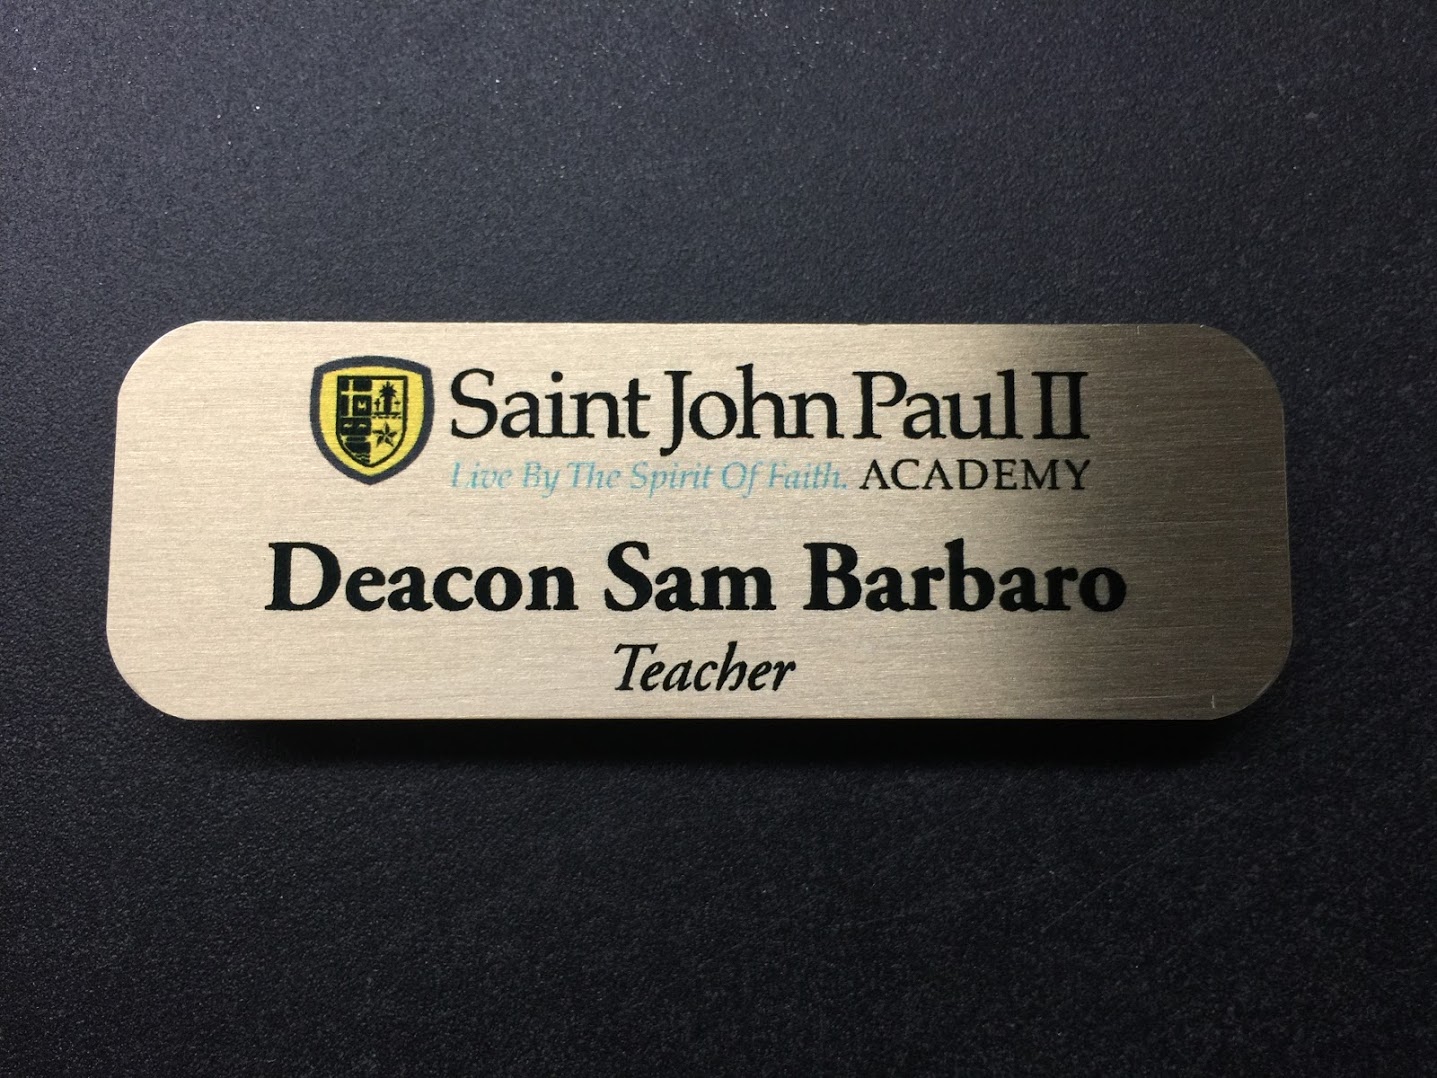 A brushed gold nametag. The design is for Saint John Paul II Academy.